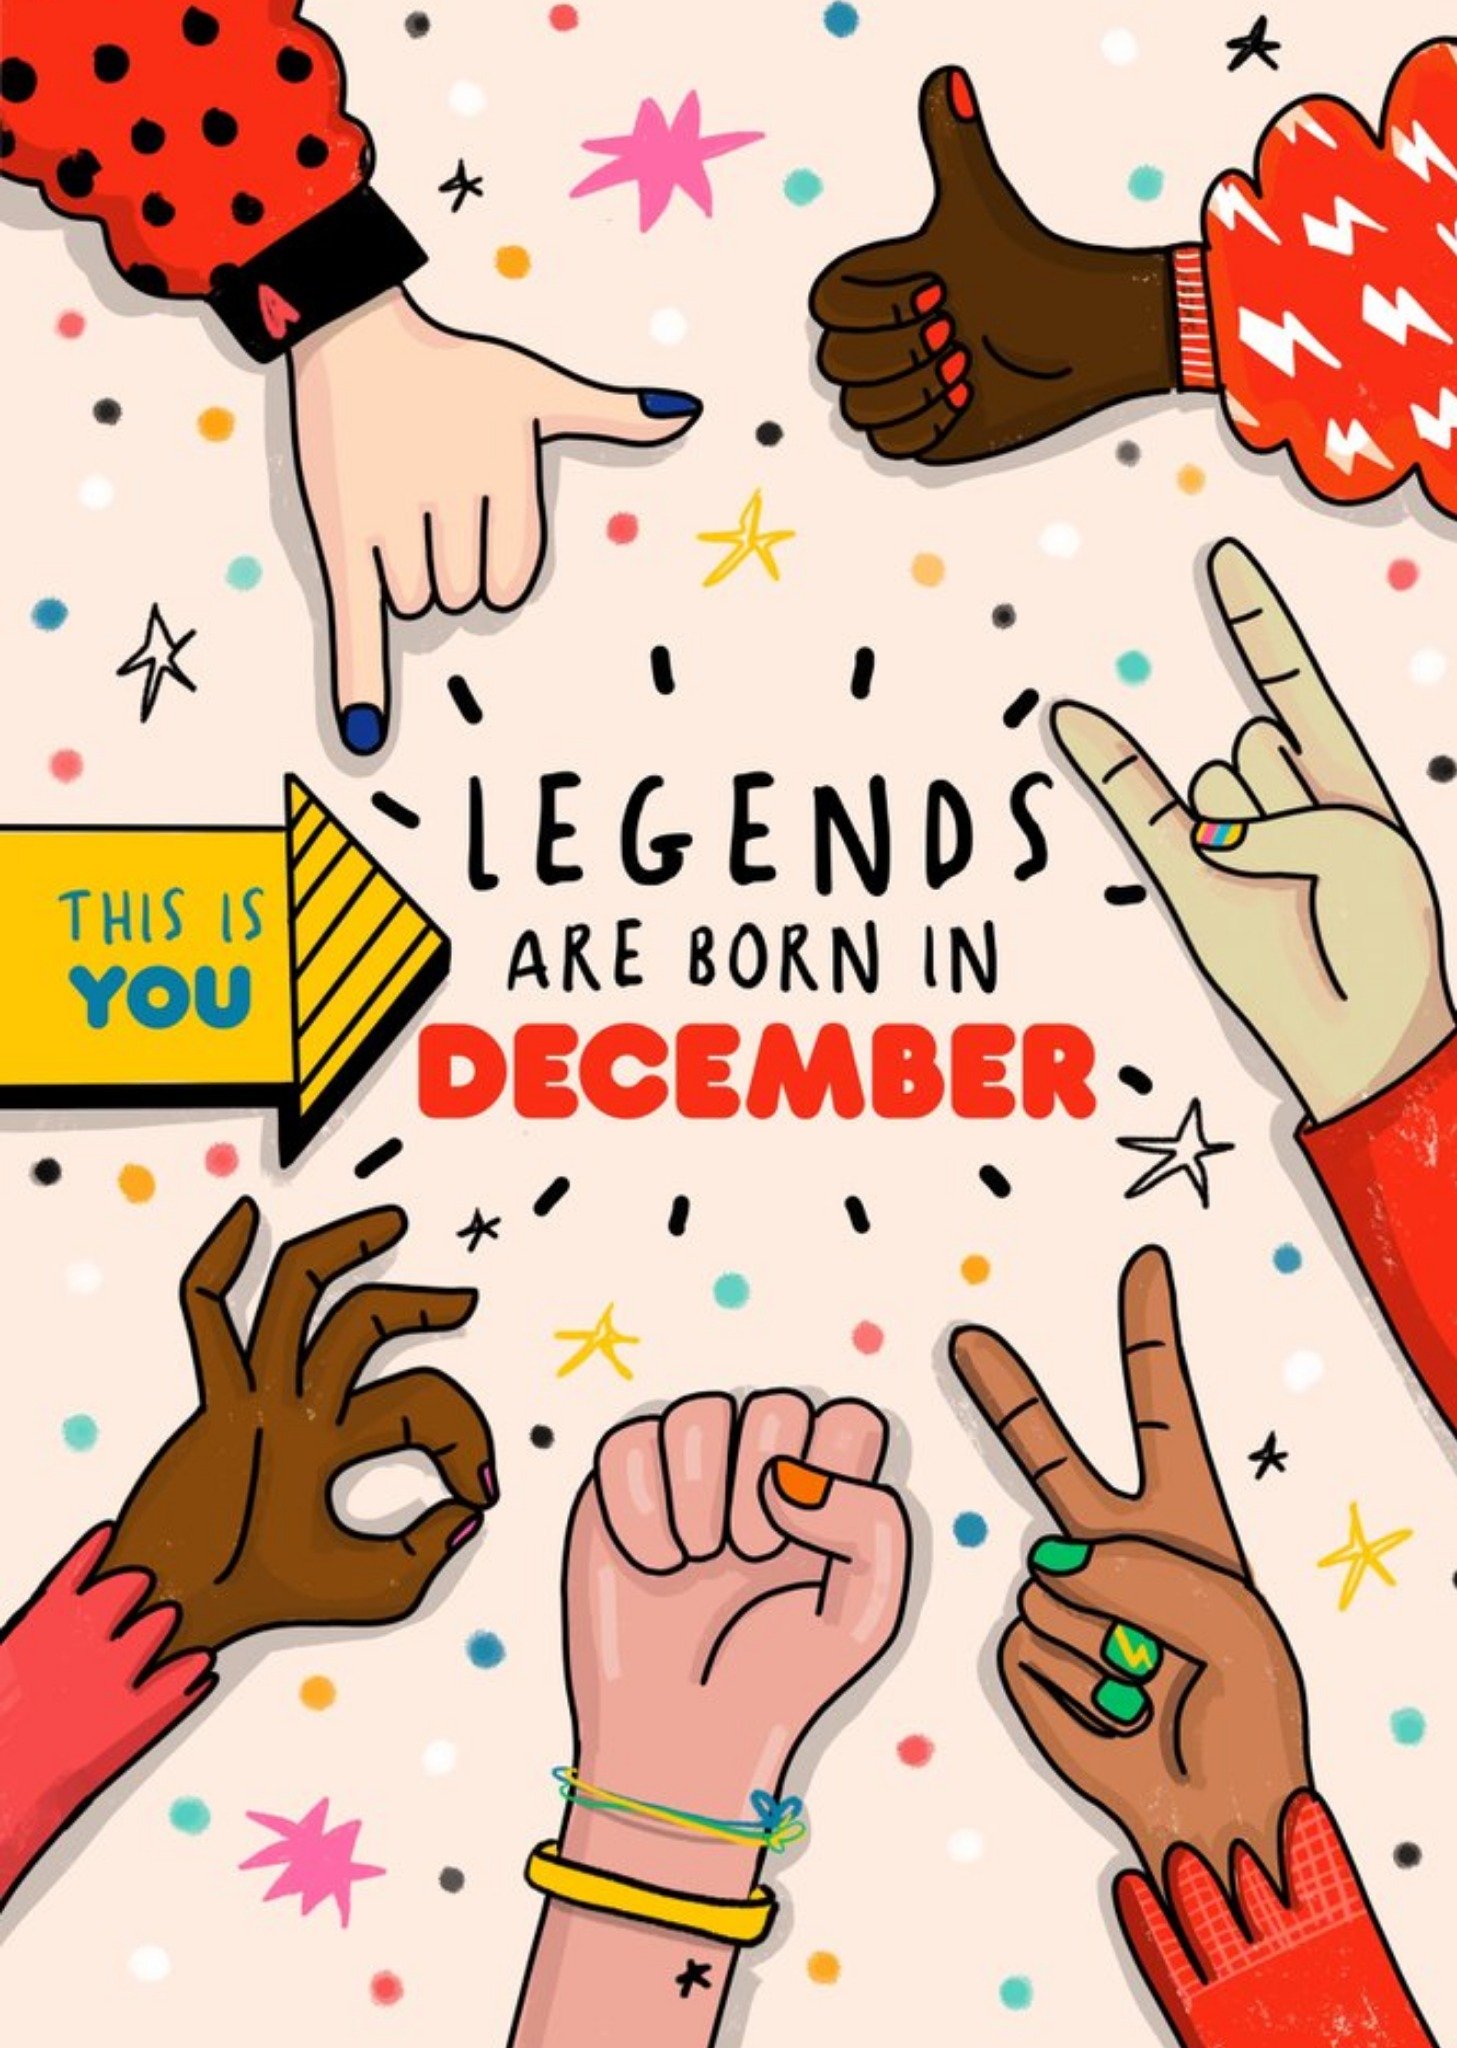 The London Studio Retro Themed Illustrations Of Various Hand Gestures Legends Are Born In December B